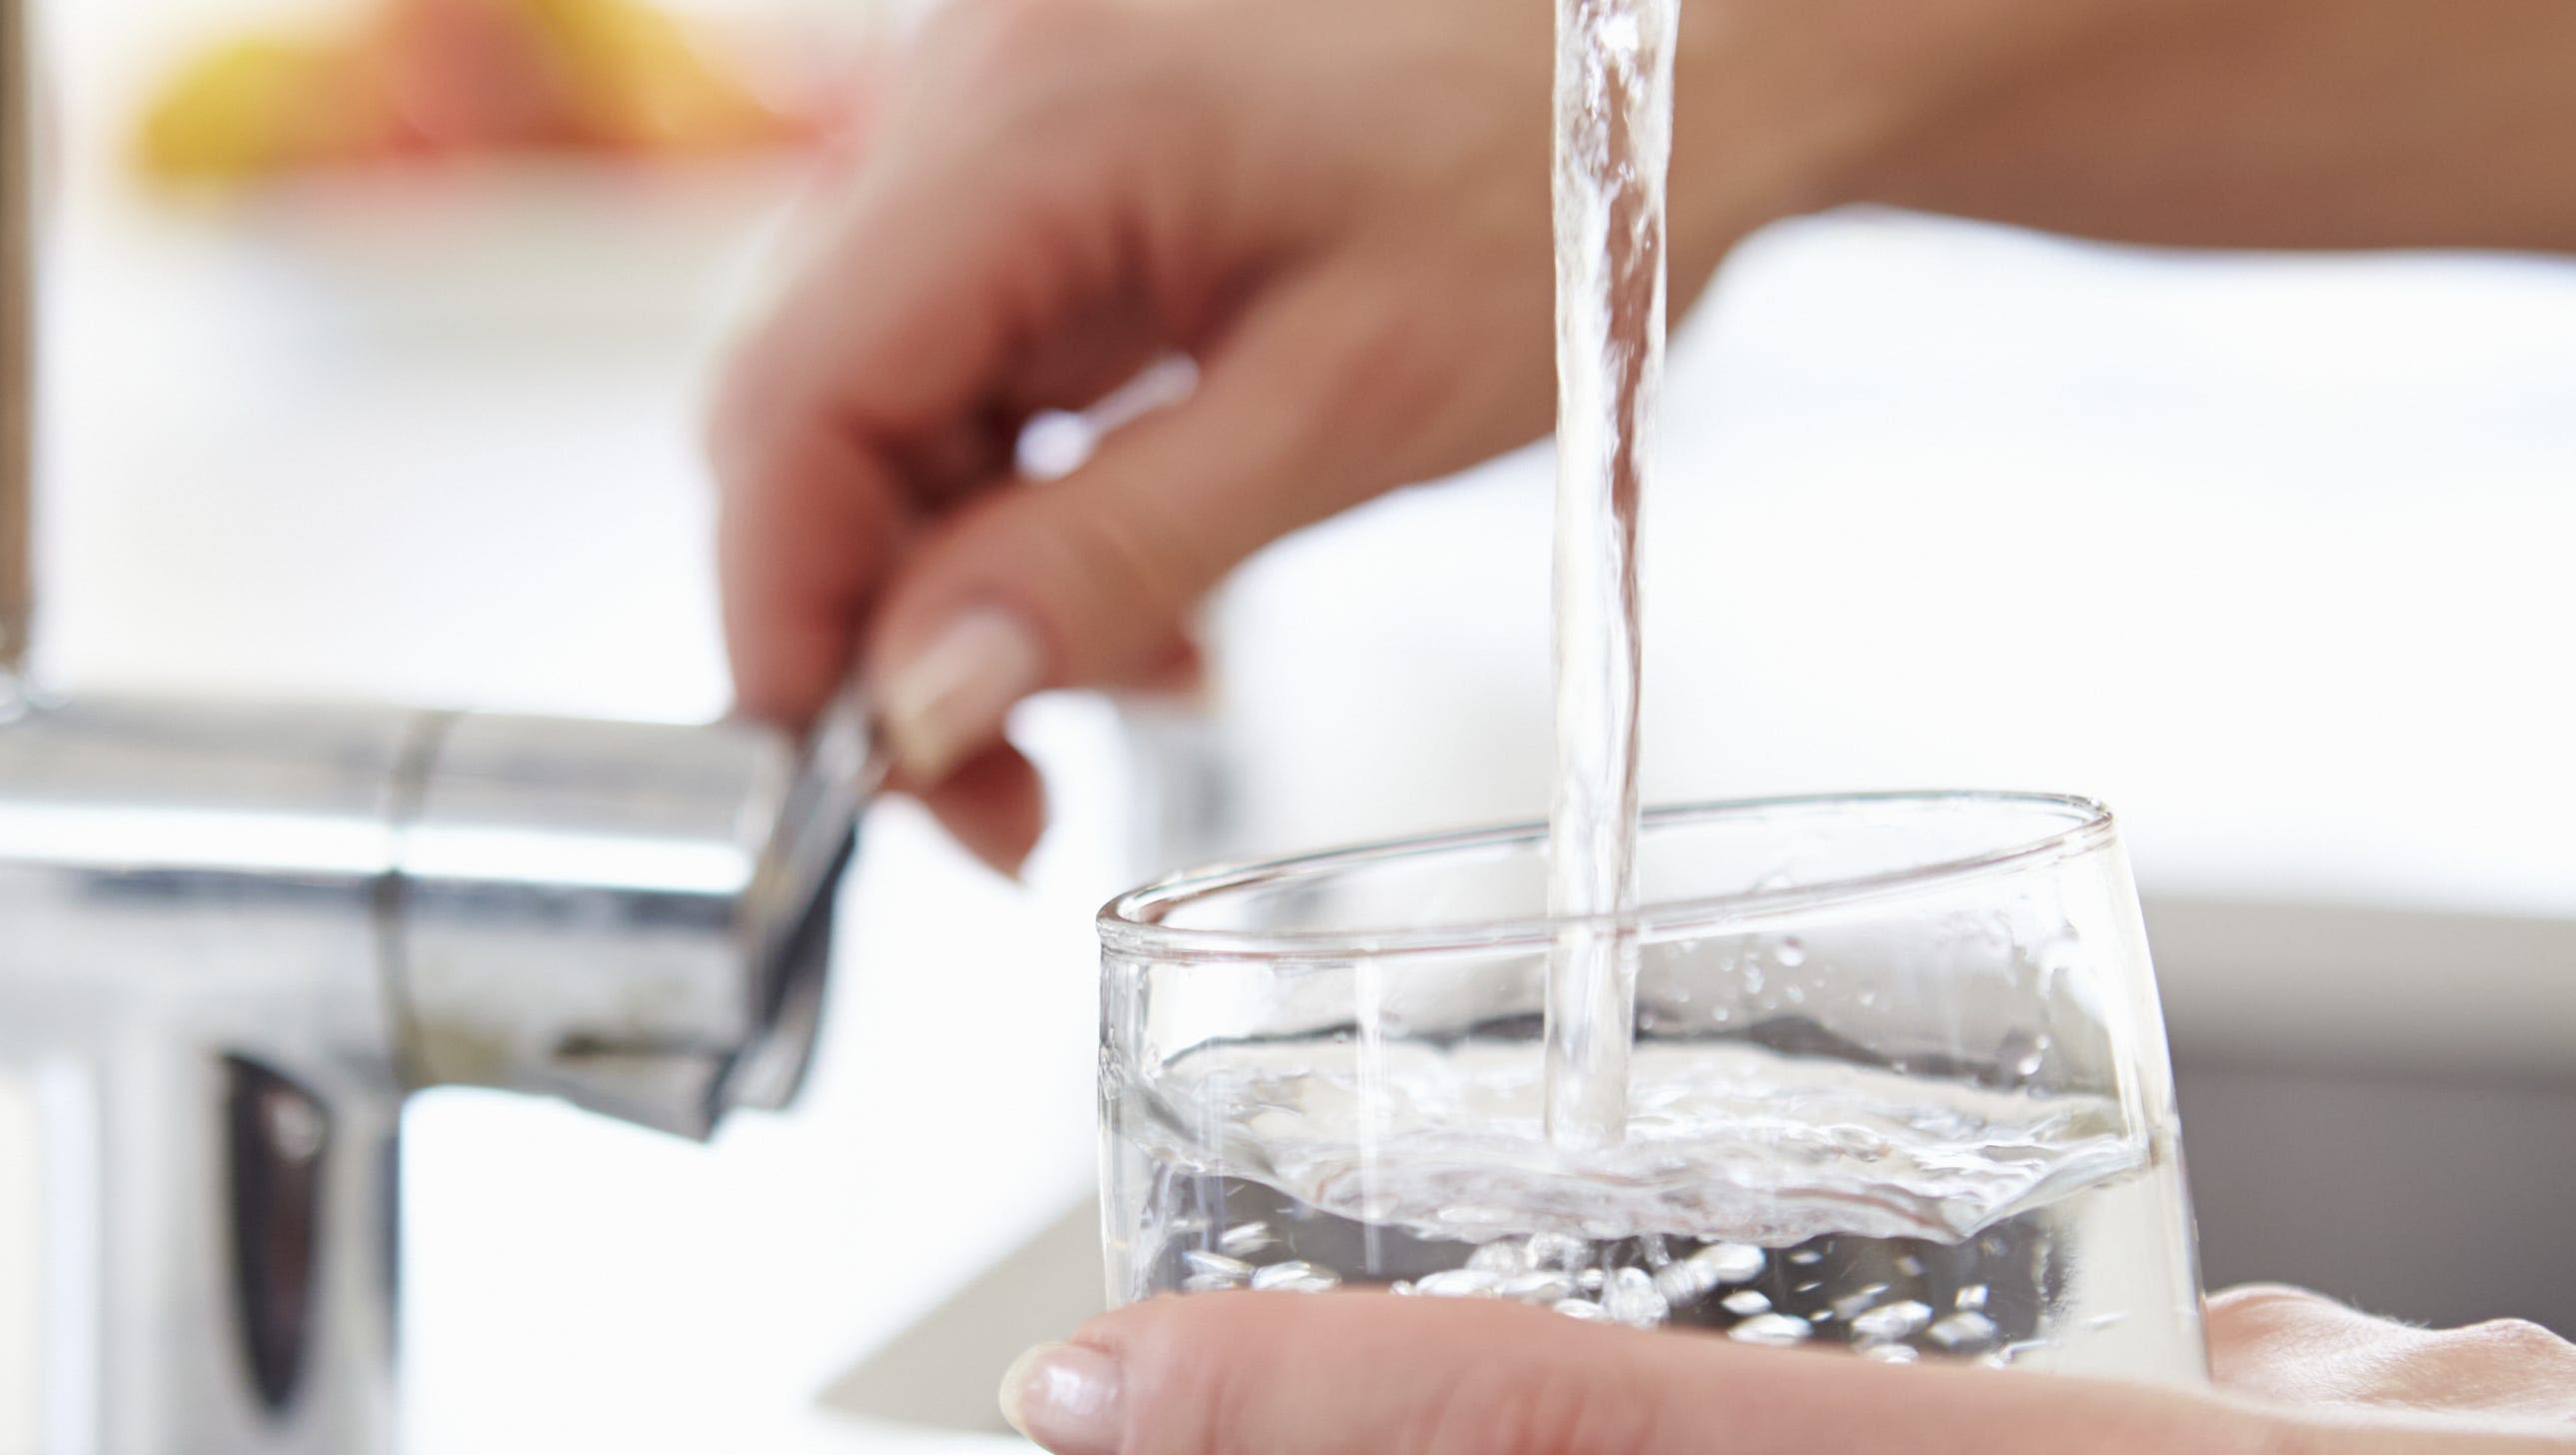 What’s in our local tap water? Tell us more